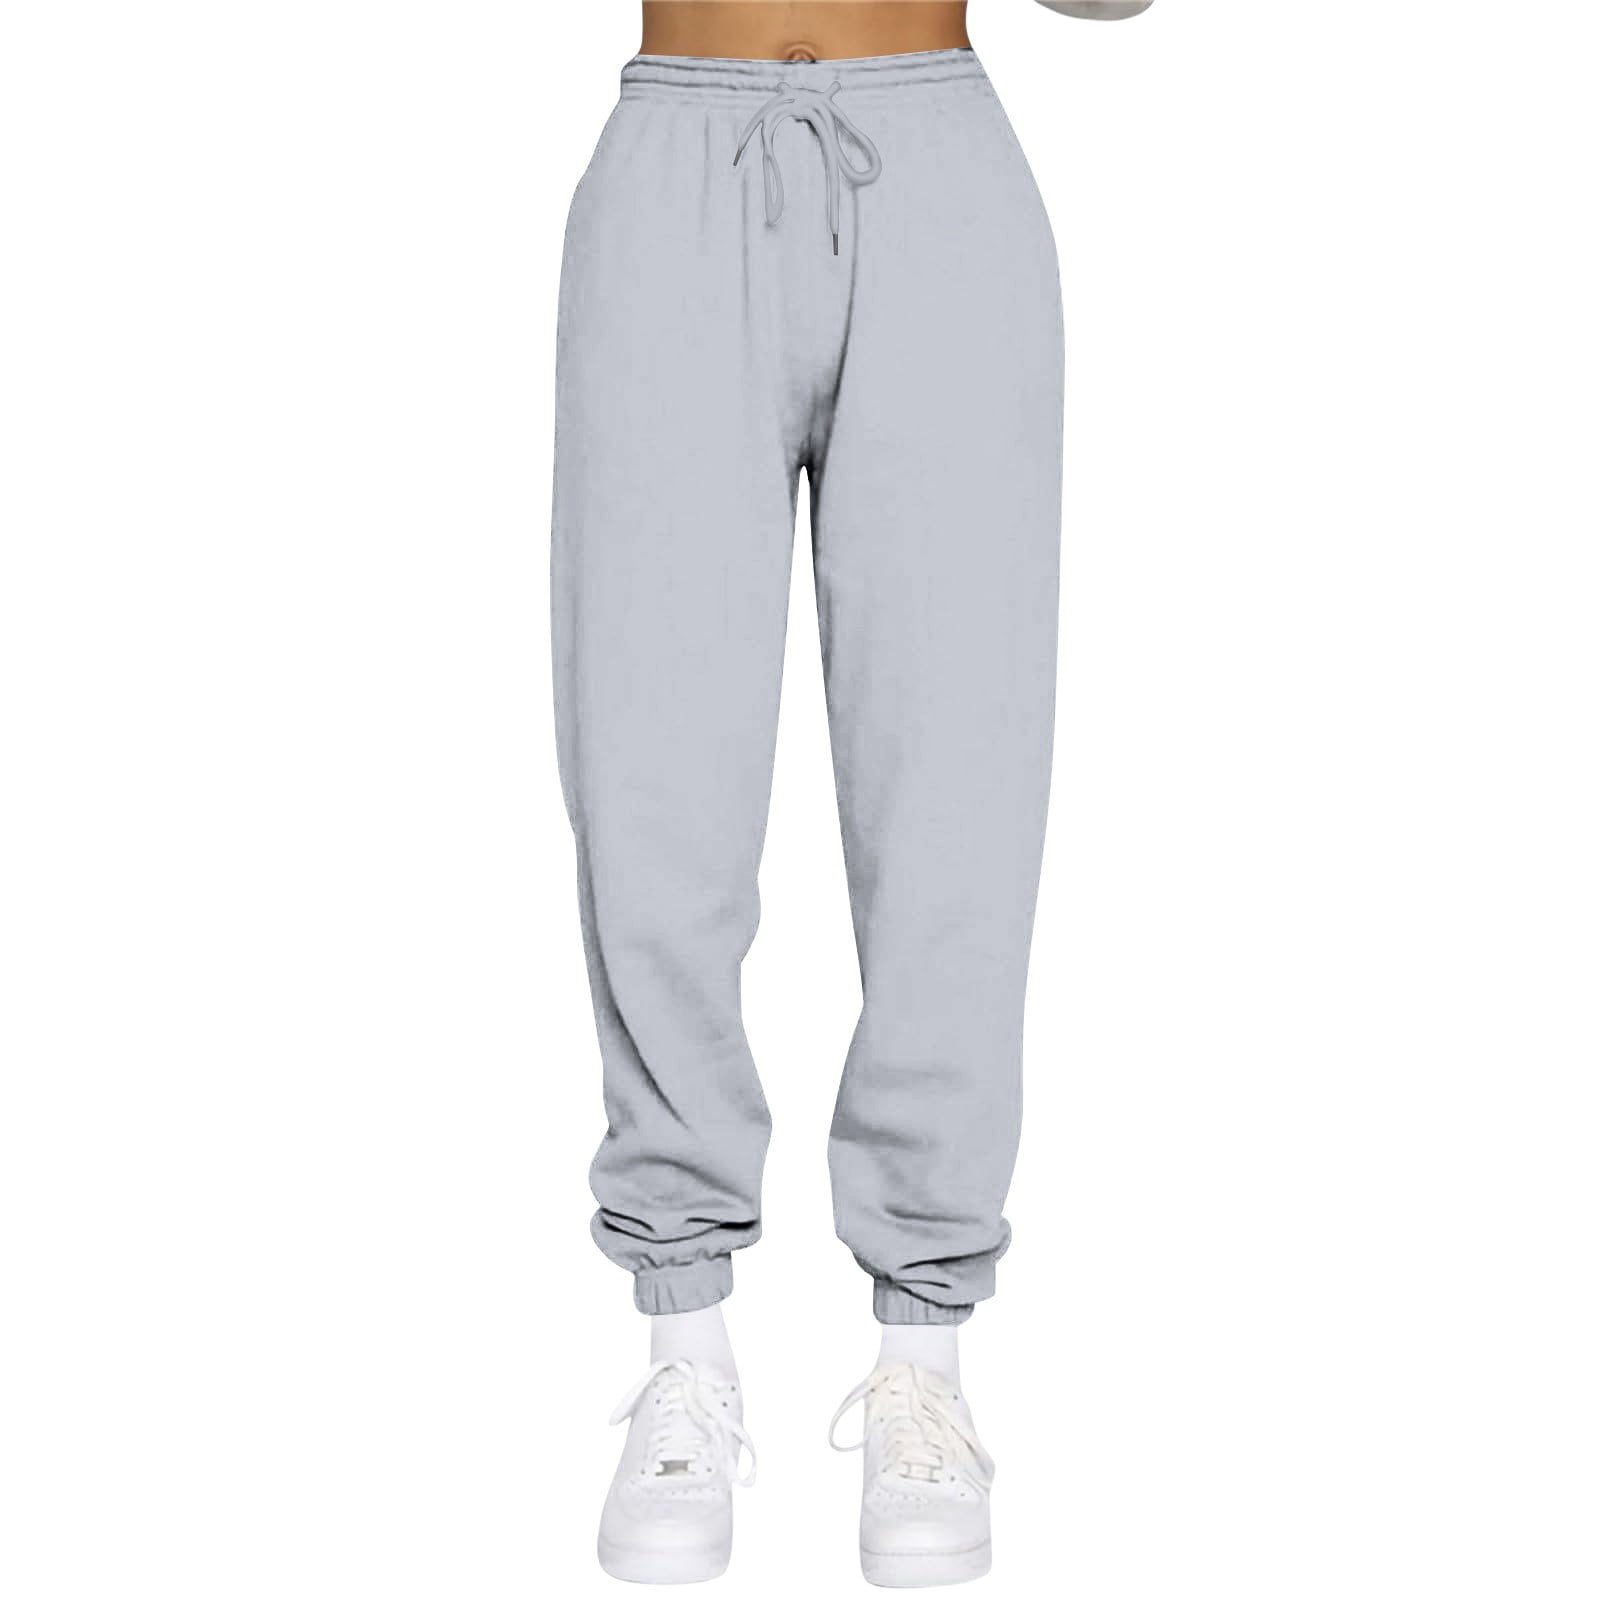 TQWQT Womens Cargo Sweatpants Cinch Bottom Fleece High Waisted Joggers  Pants Athletic Lounge Trousers with Pockets Light Gray S 